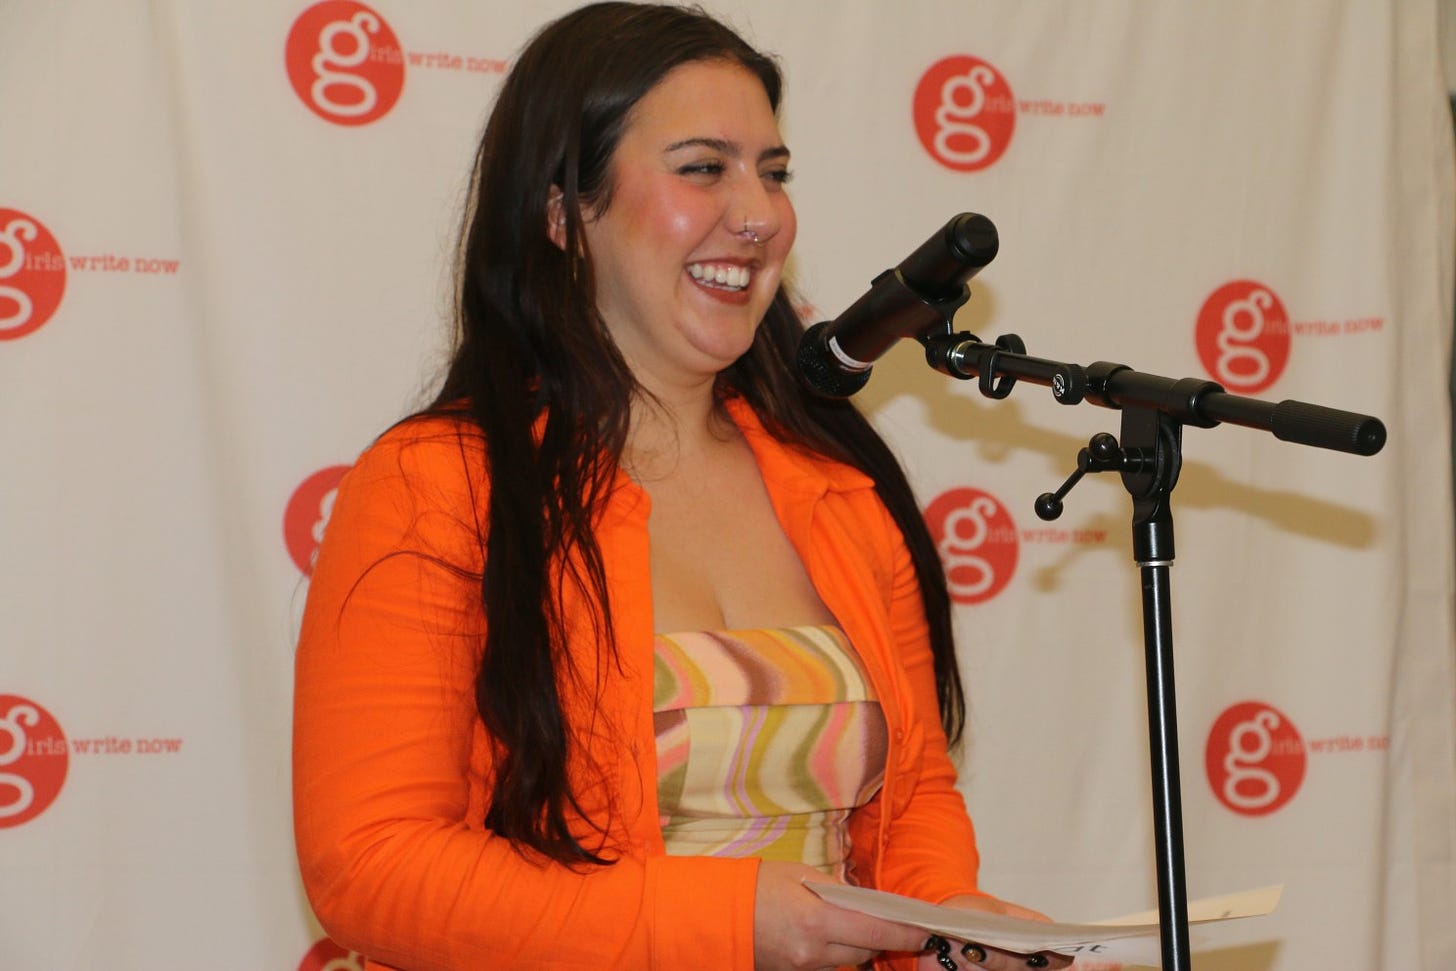 Subject Annabel in an orange jacket and multi-color dress at a mic